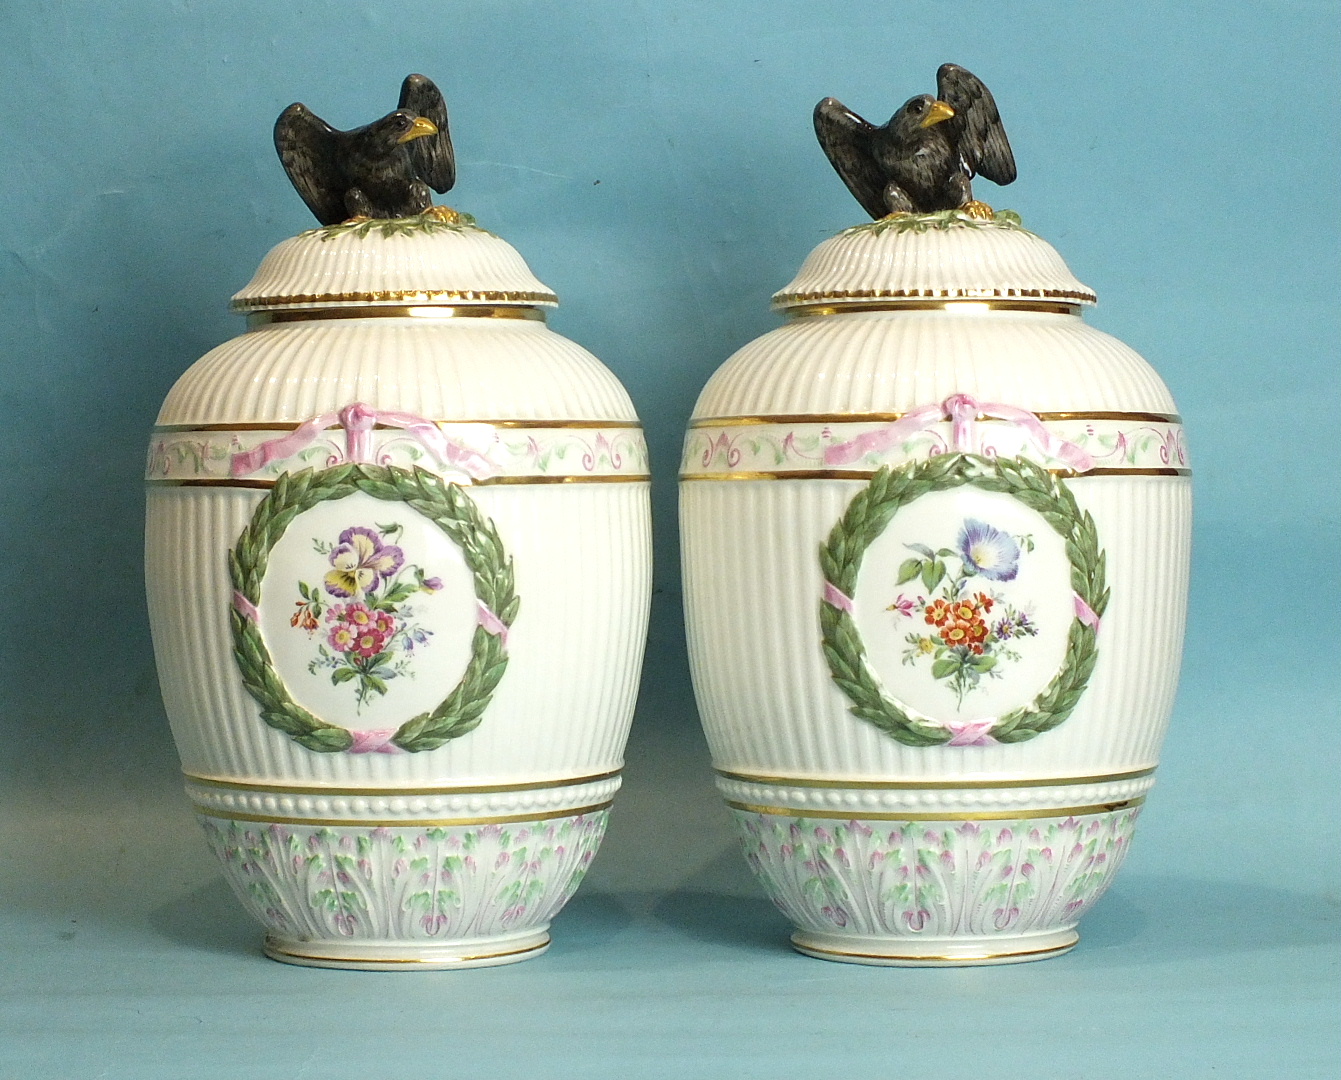 A pair of late-19th century Berlin baluster-shaped vases and covers, each with fluted body painted